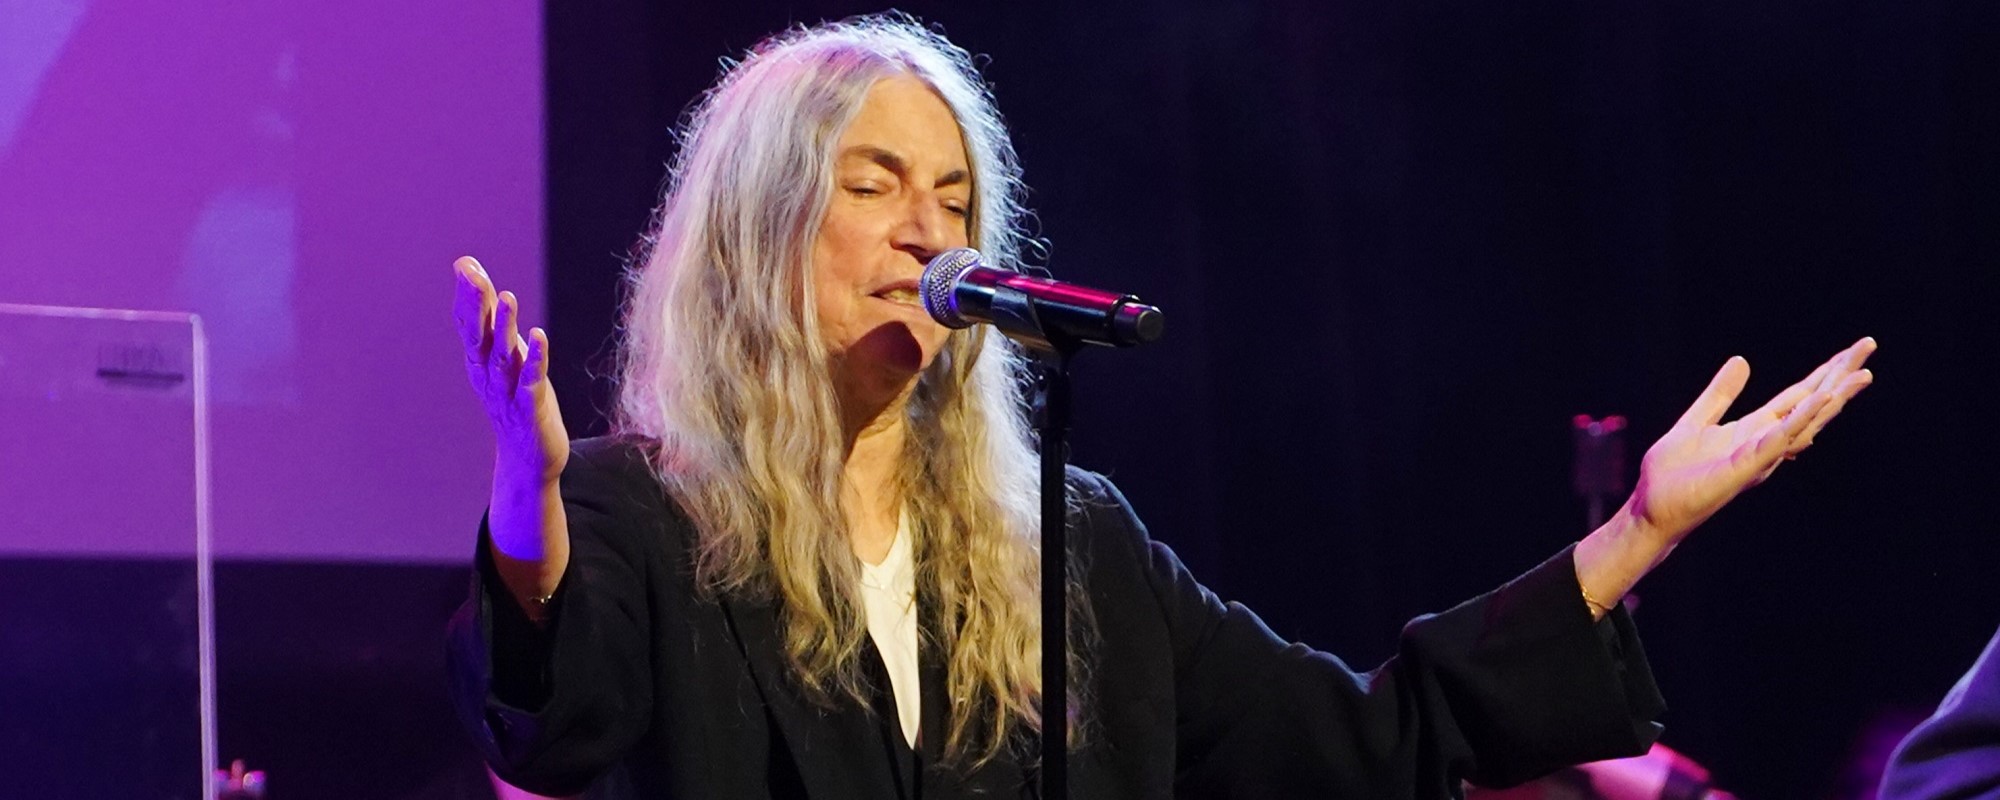 Patti Smith Shares Promising Health Update After Being Rushed to Hospital With “Sudden Illness”